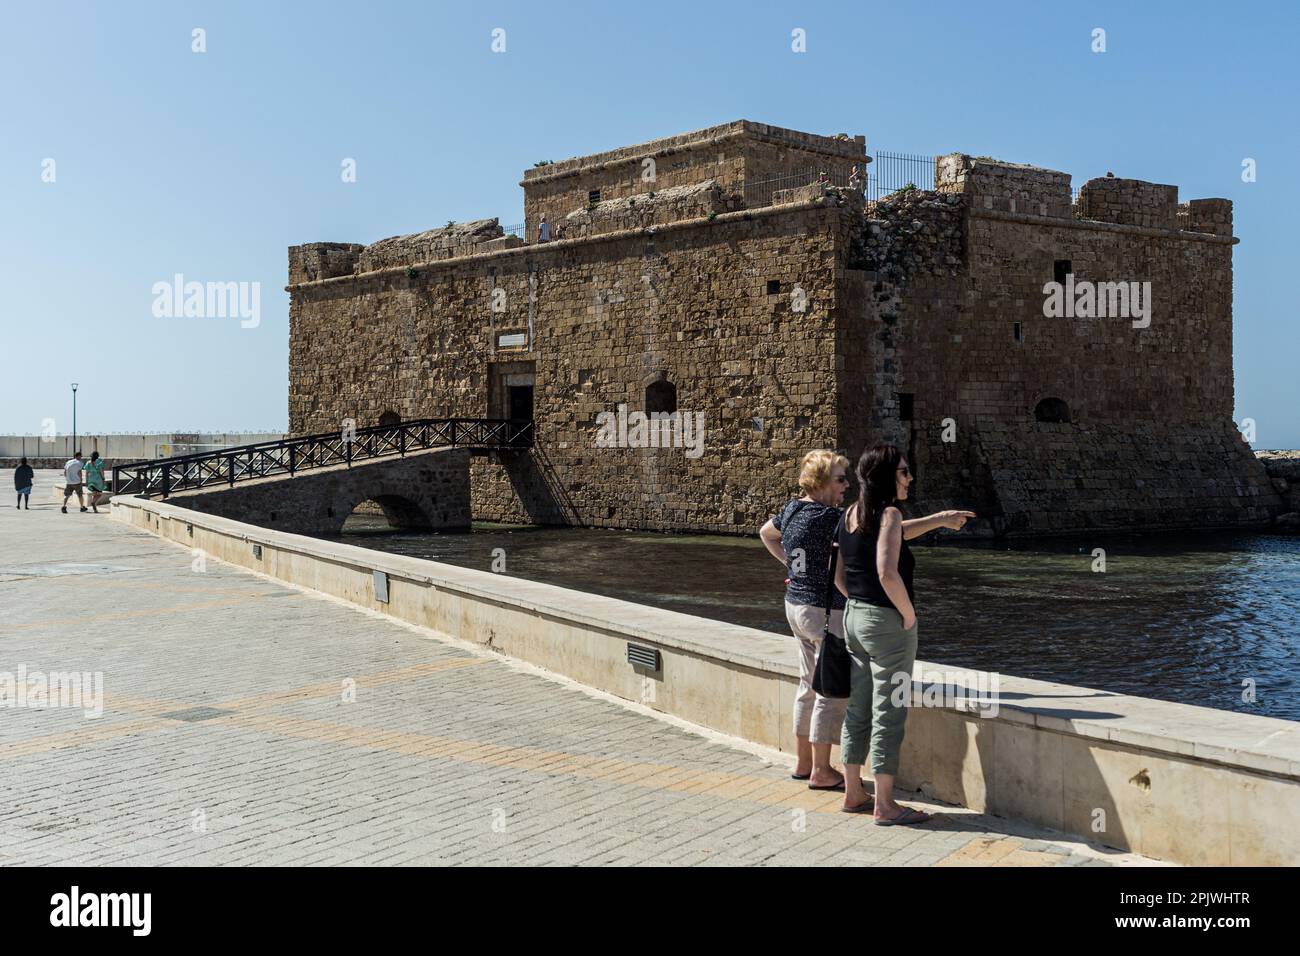 Tourists are seen in front of the castle at the port of Paphos, Cyprus, on Apr. 4, 2023. Cyprus sees massive increase in tourist arrivals in February with UK topping the list. Tourist arrivals in Cyprus increased by 65.6% year-on-year in February 2023. This fact, combined with the facts that Cyprus welcomed 3.2 million tourists last year, despite the absence of 800,000 Russian and Ukrainian tourists because of the war and that for 2022 it is estimated that tourists' spending has increased by about 13% on average for each trip, makes 2023 seem very promising. (Photo by Kostas Pikoulas/Sipa USA) Stock Photo